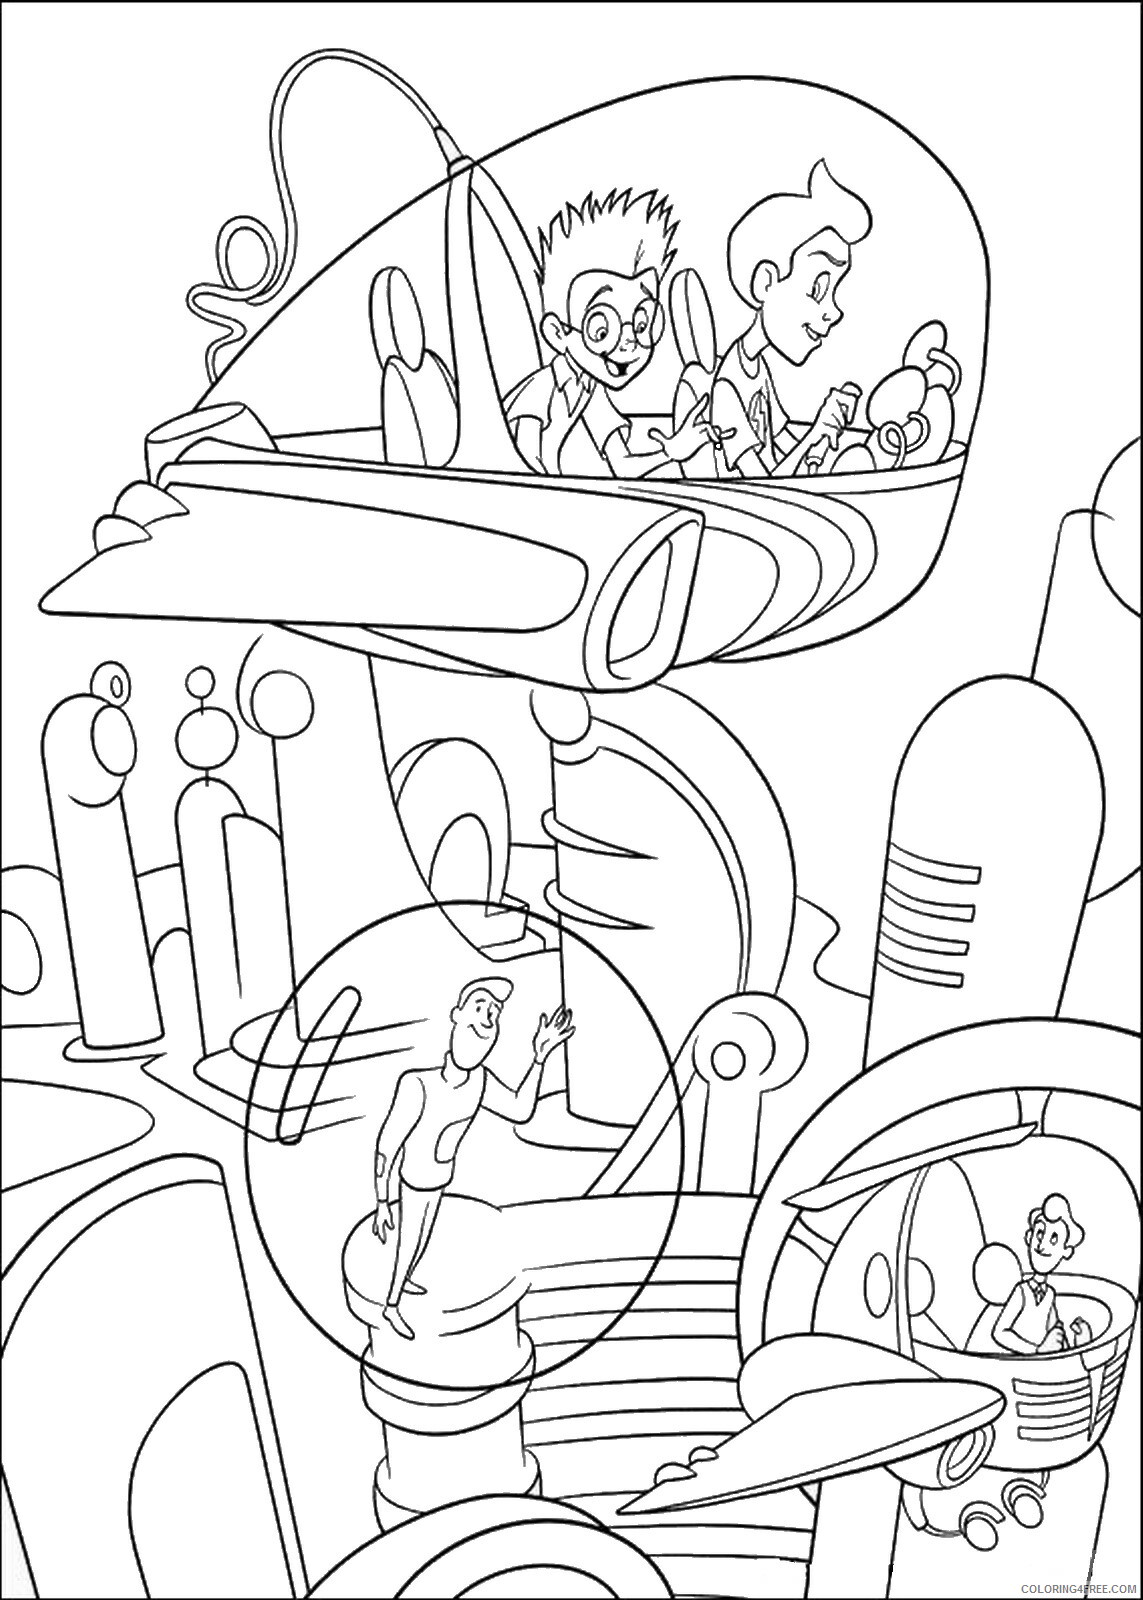 Meet the Robinsons Coloring Pages TV Film Printable 2020 04974 Coloring4free